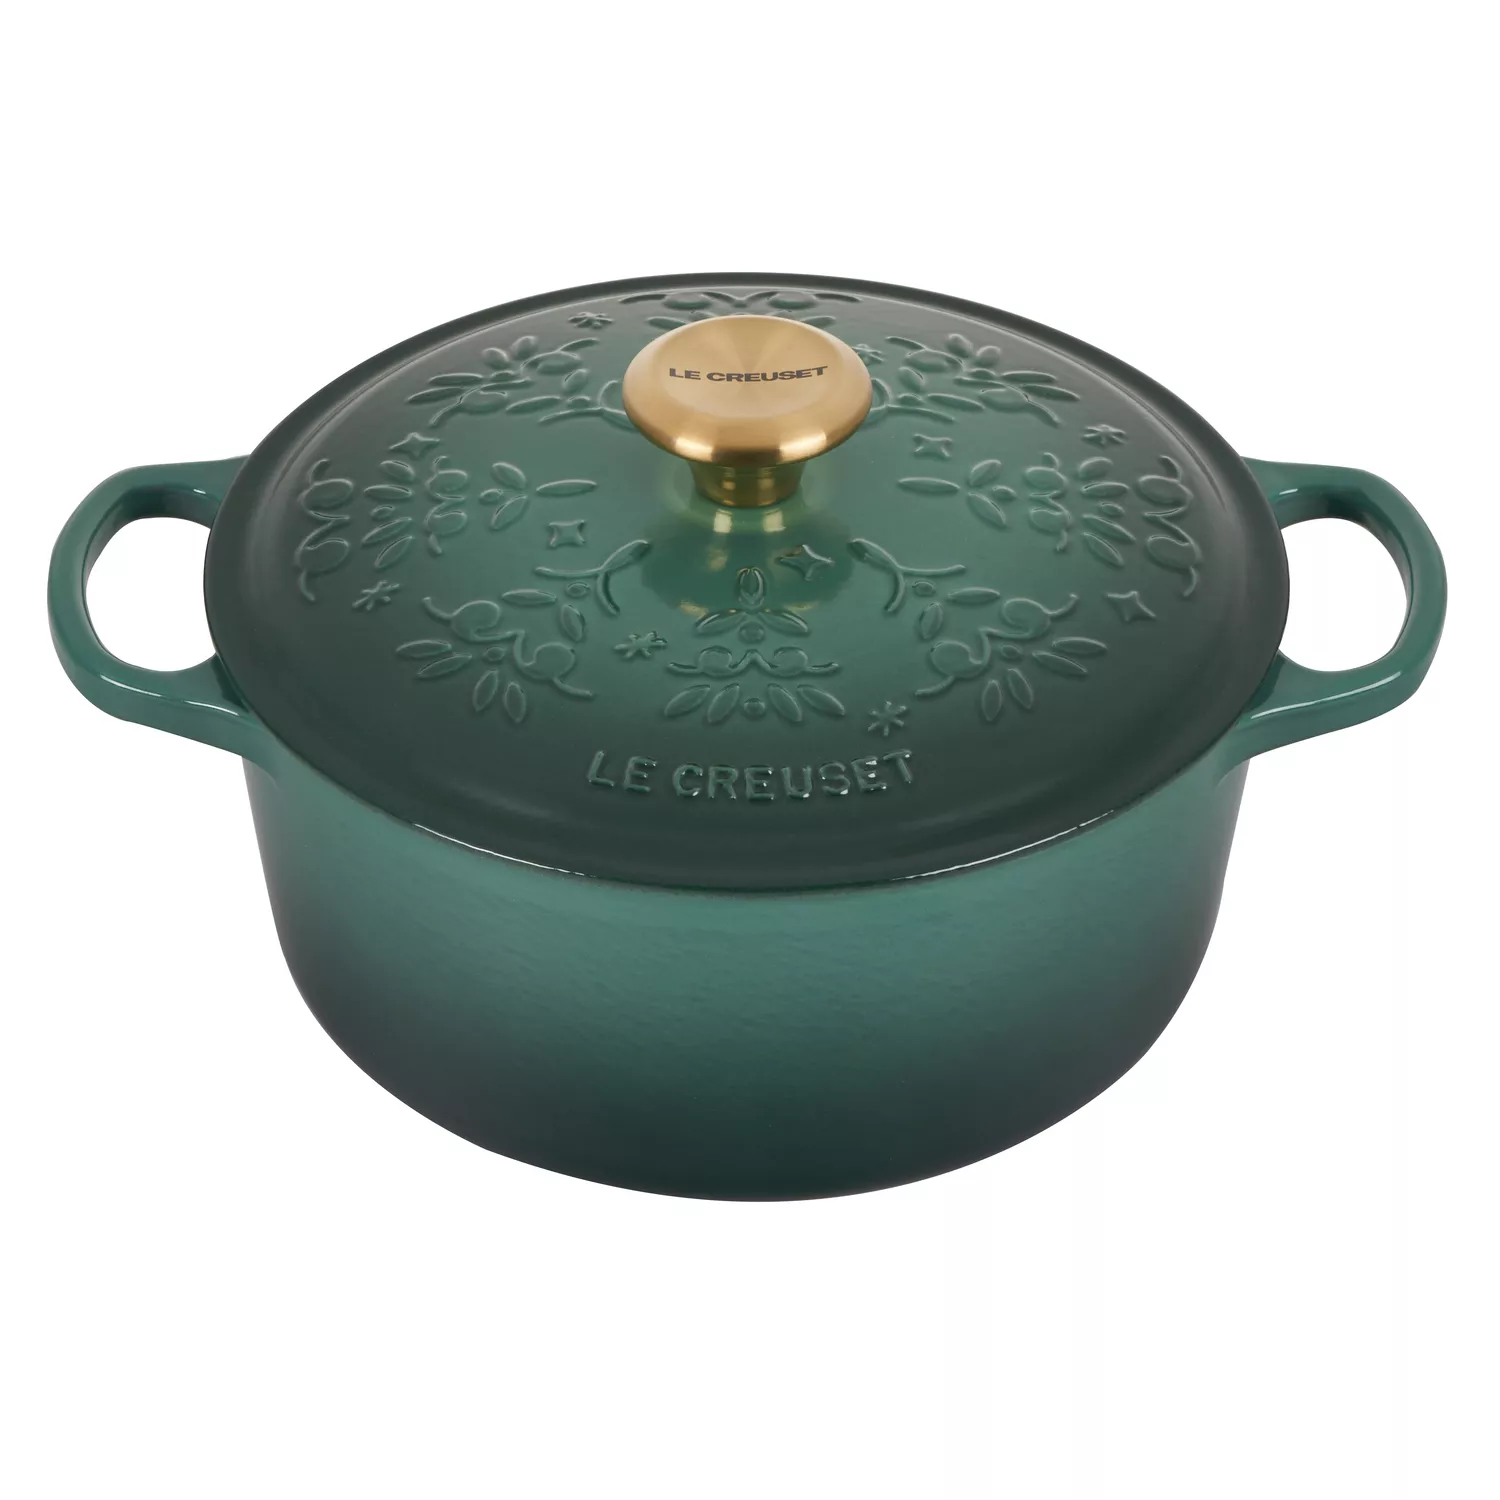 Dutch Ovens for sale in Oroville, California